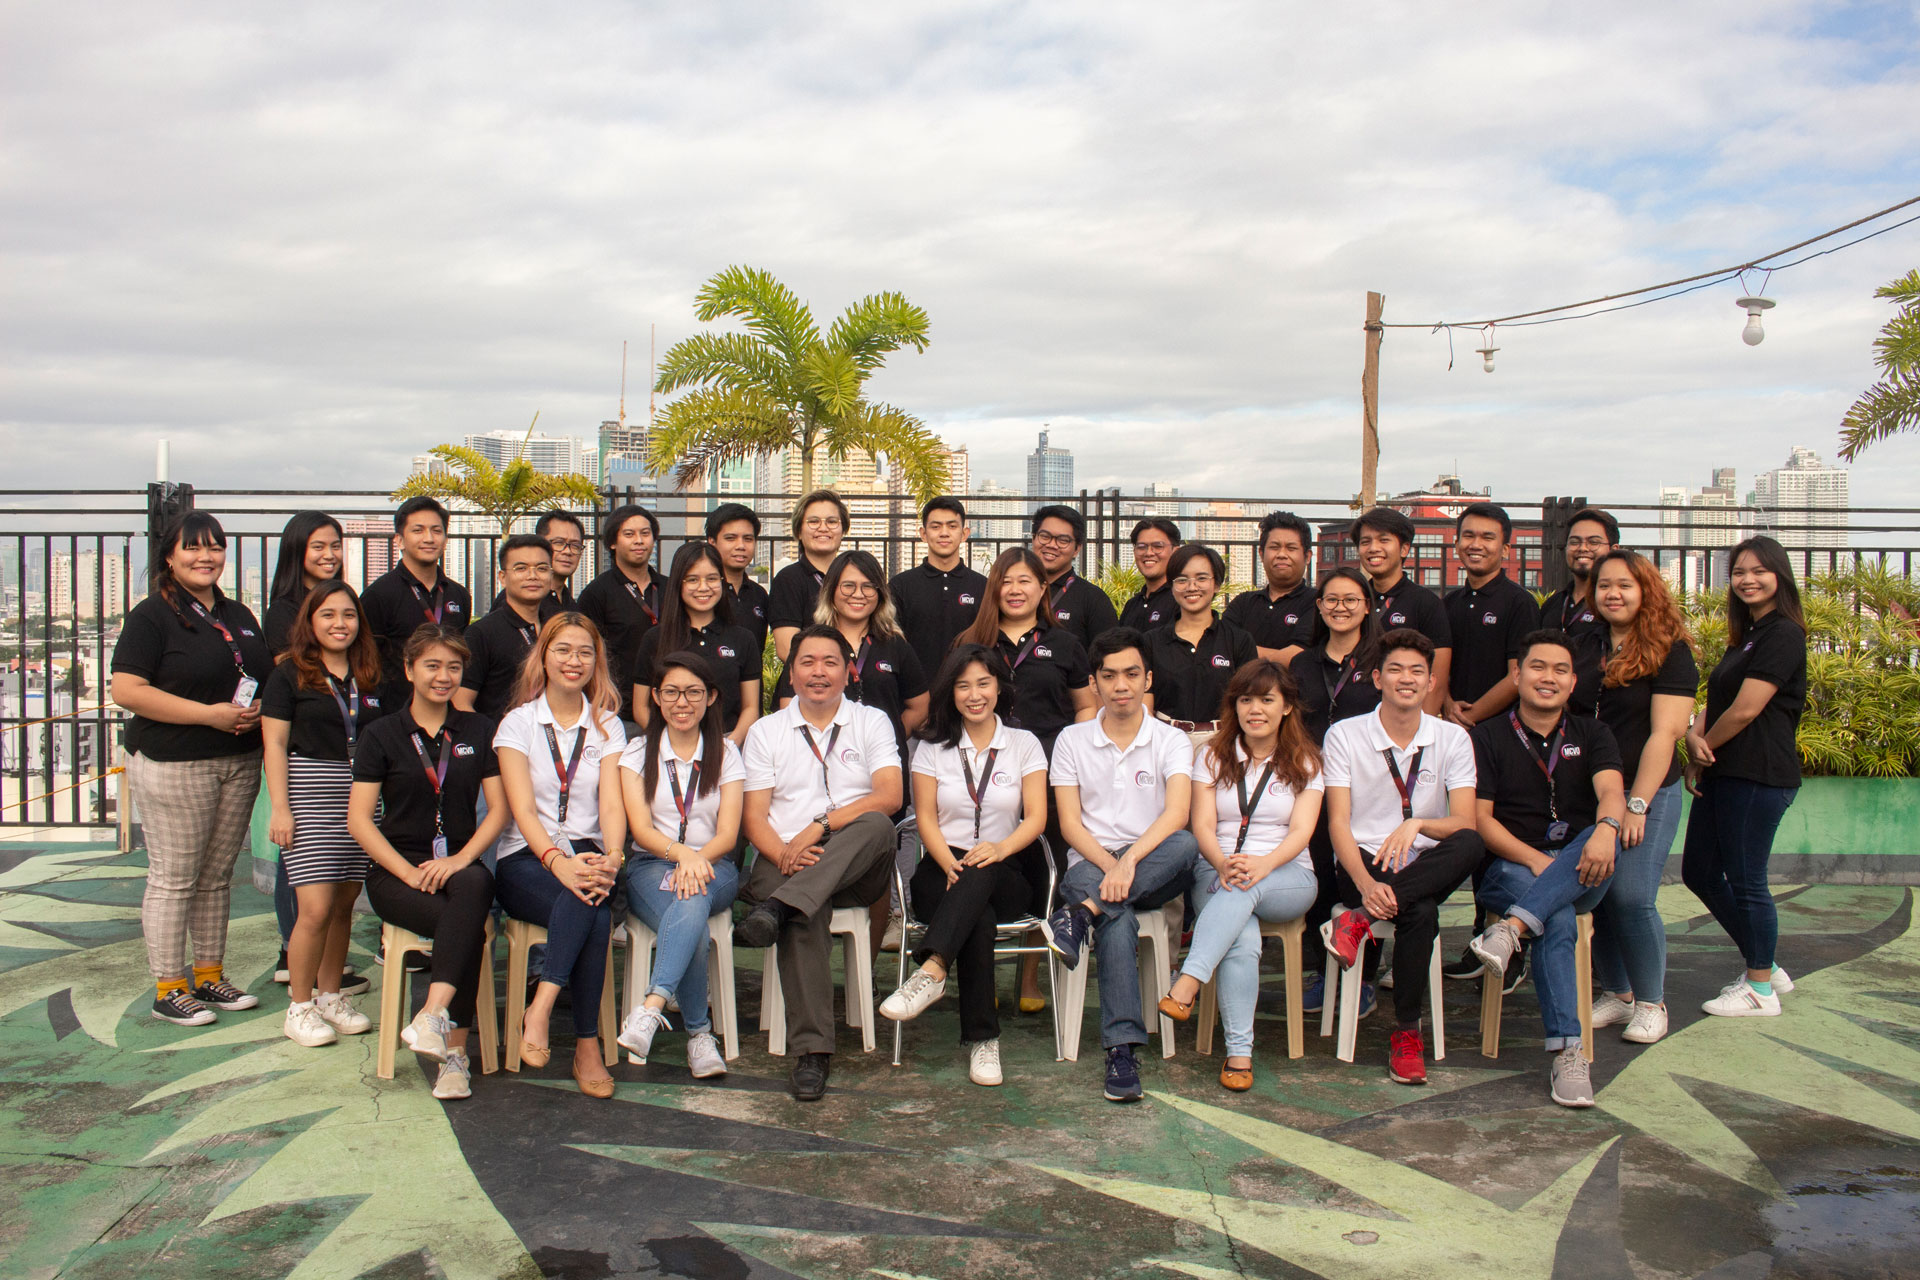 Outsourcing Company in the Philippines, MCVO an Outsourcing Company in the Philippines Celebrates its 3rd-Year Anniversary Amid COVID-19 Scare